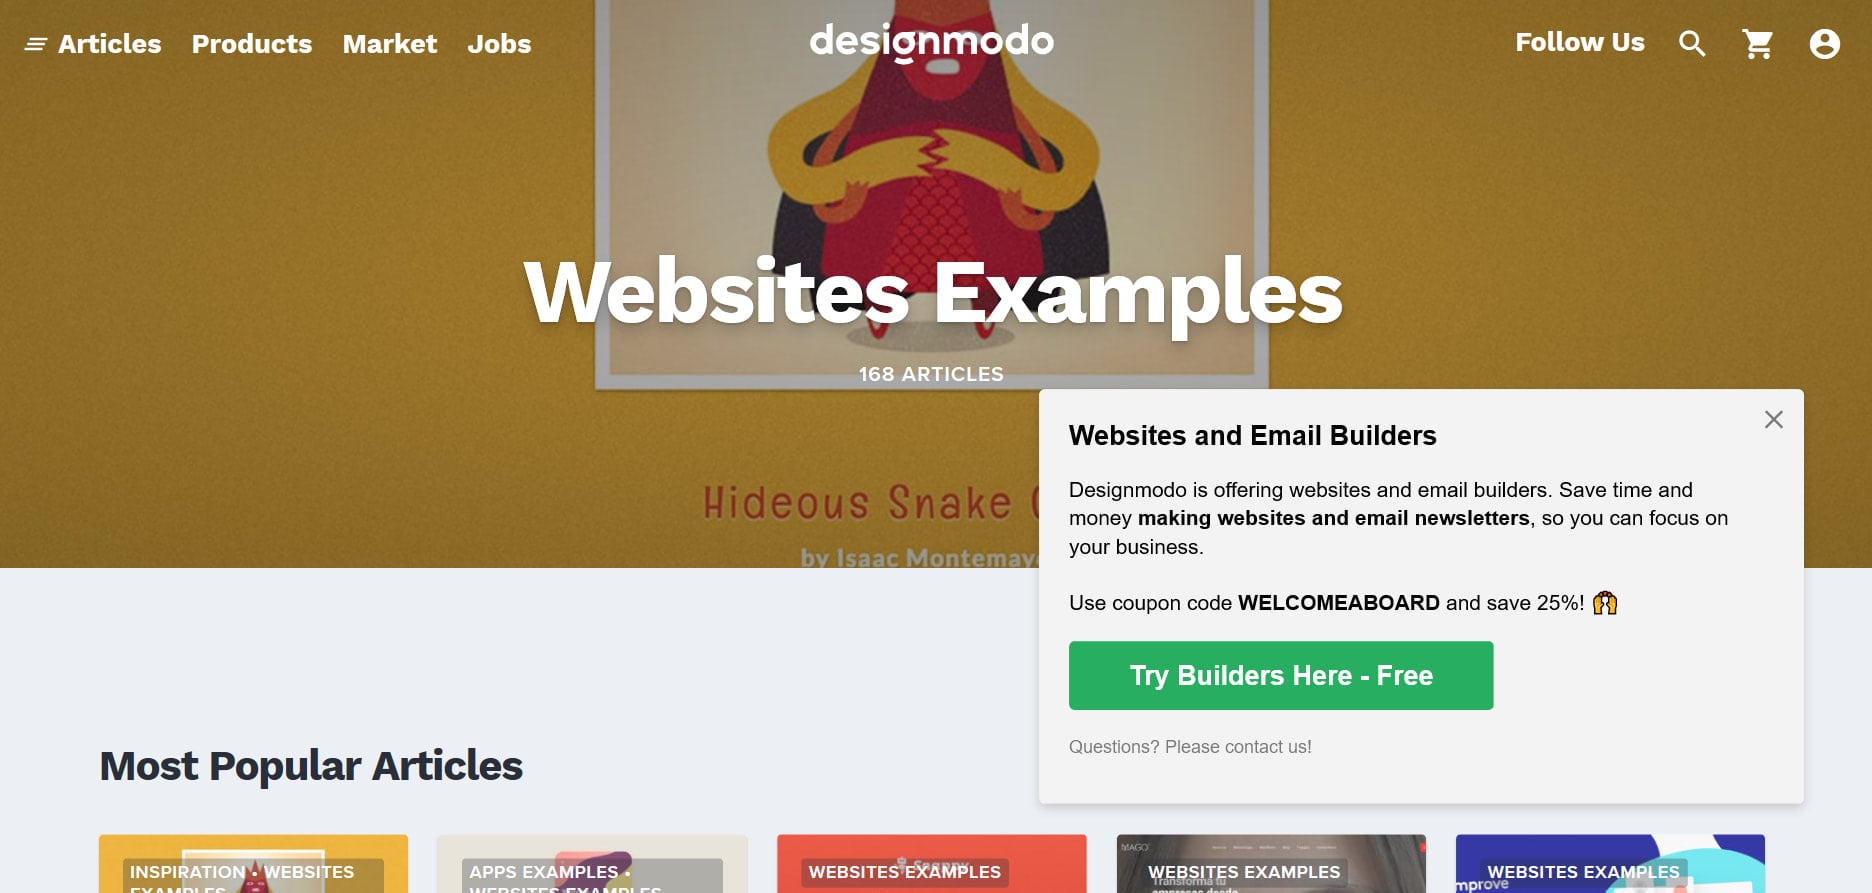 A call-to-action slide-in used on the Designmodo website